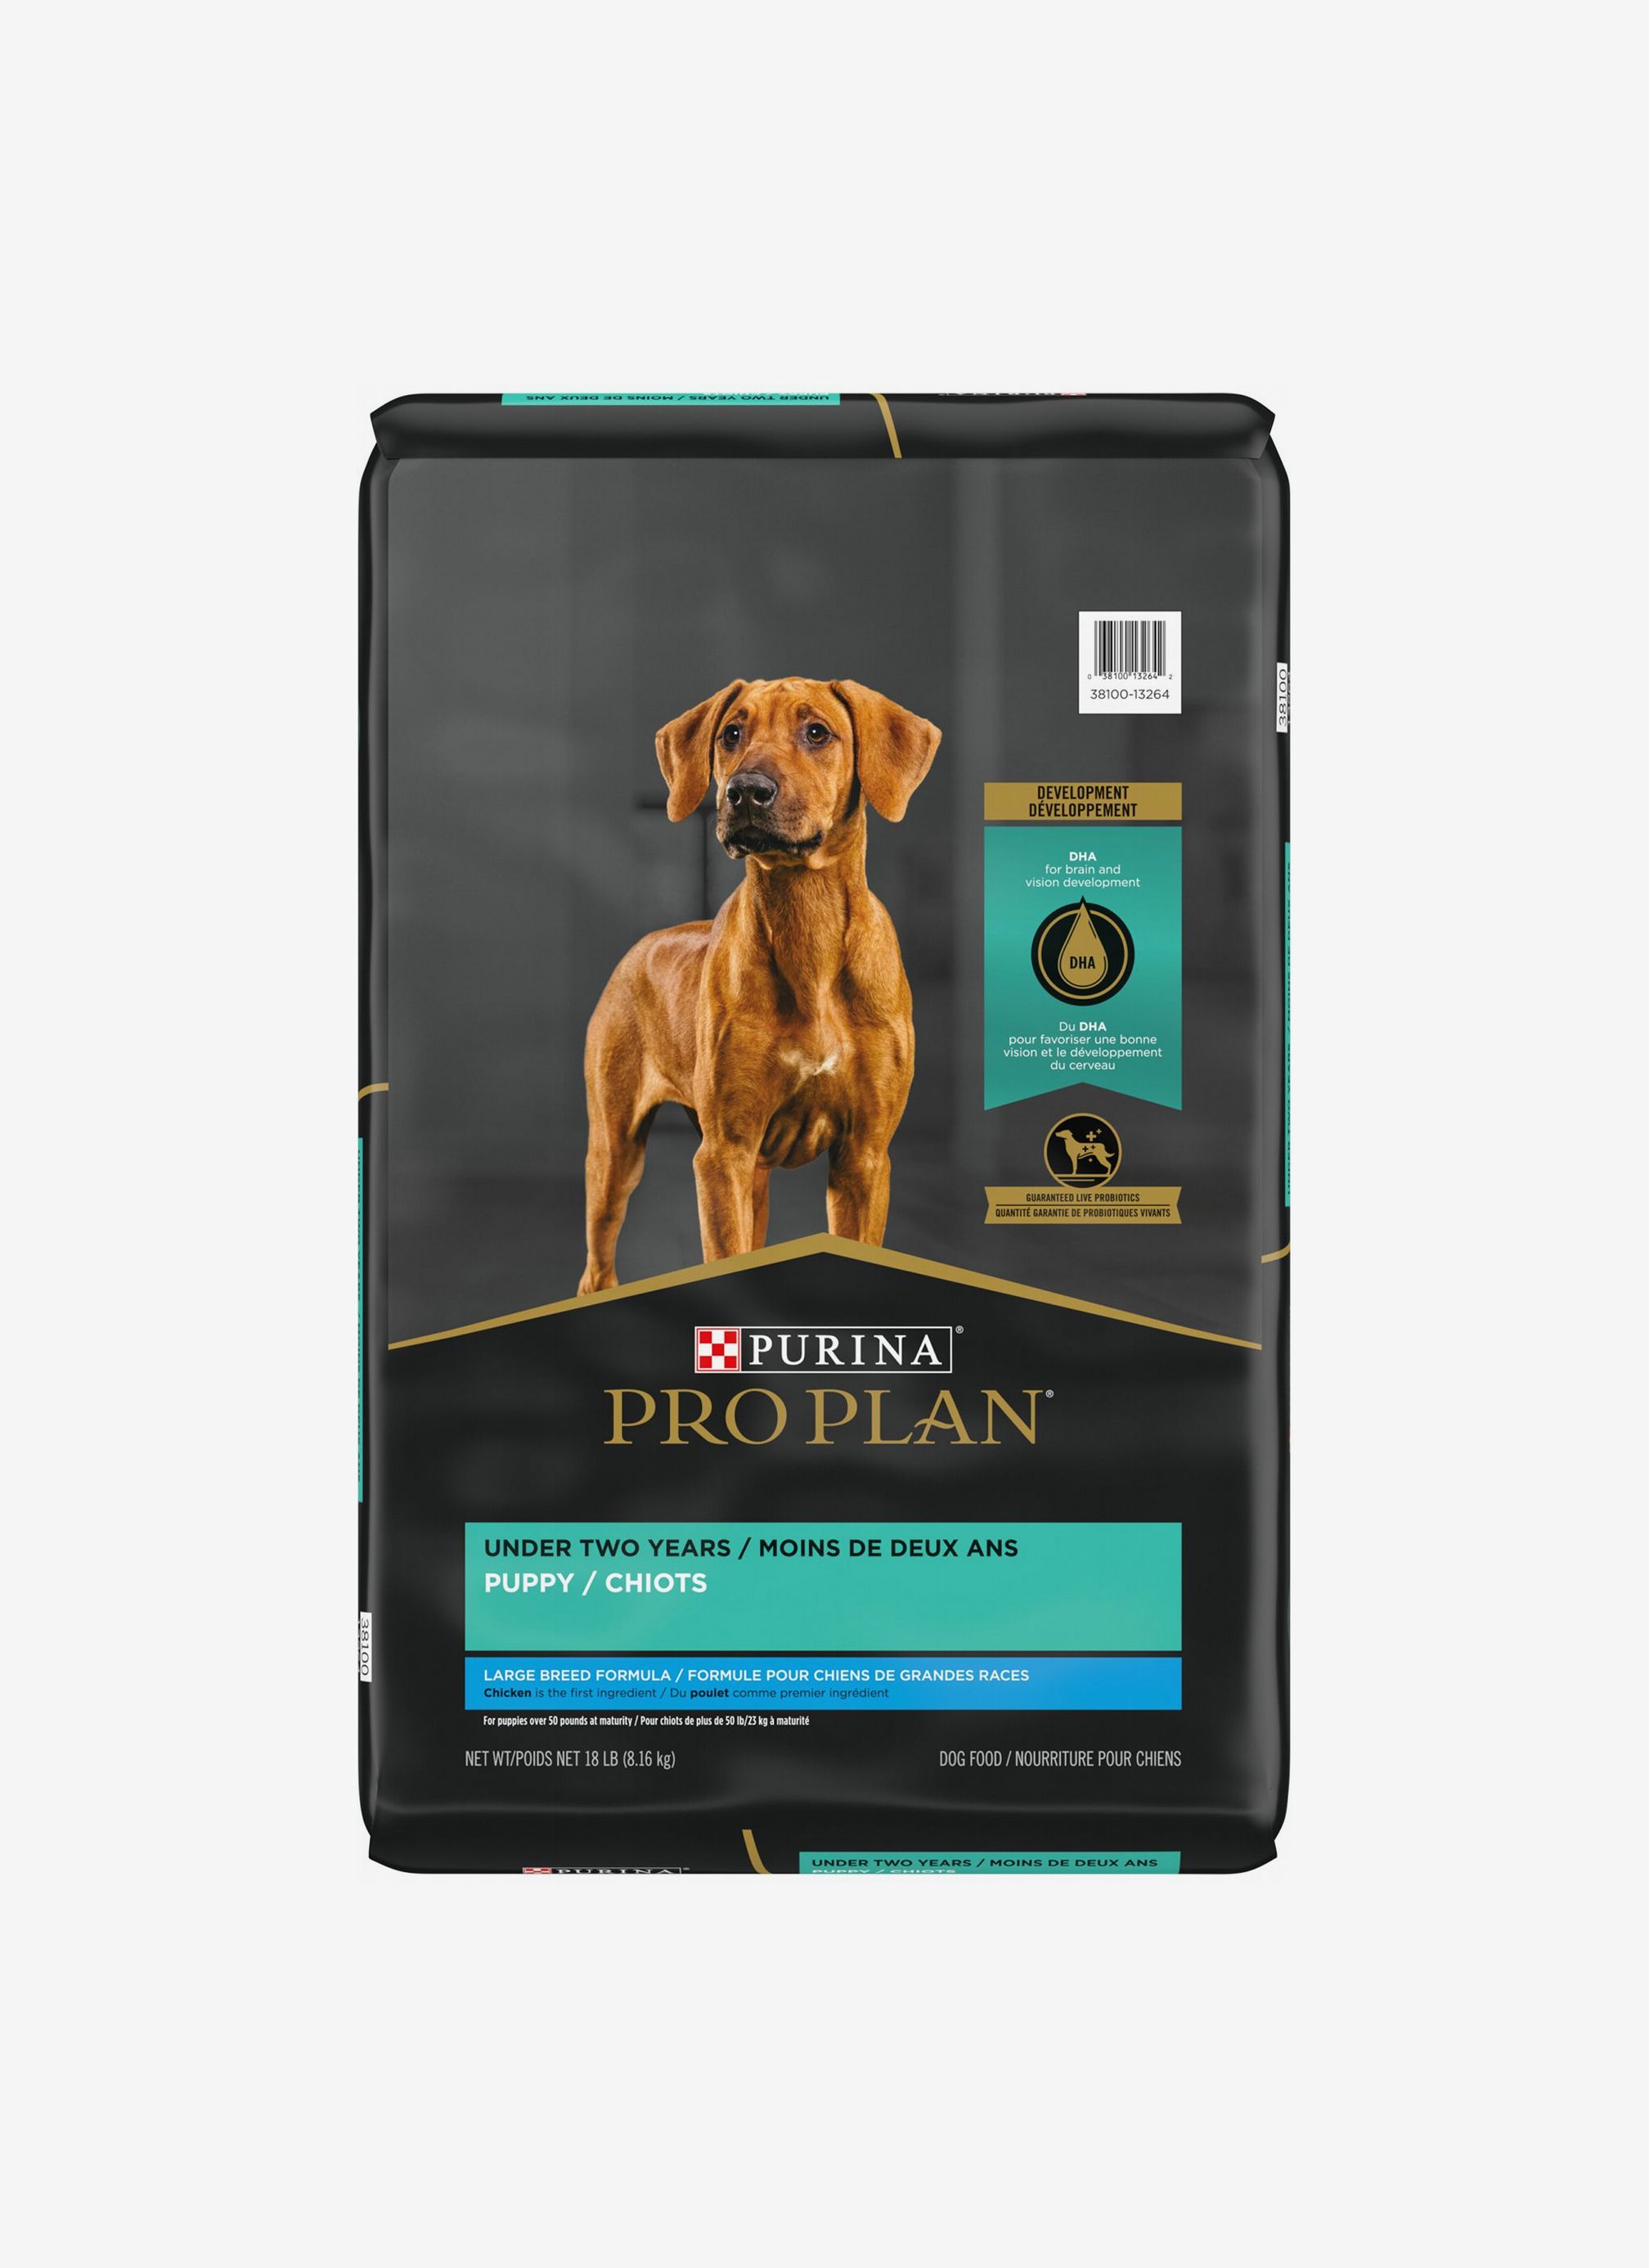 how do you introduce a new dog food to your dog